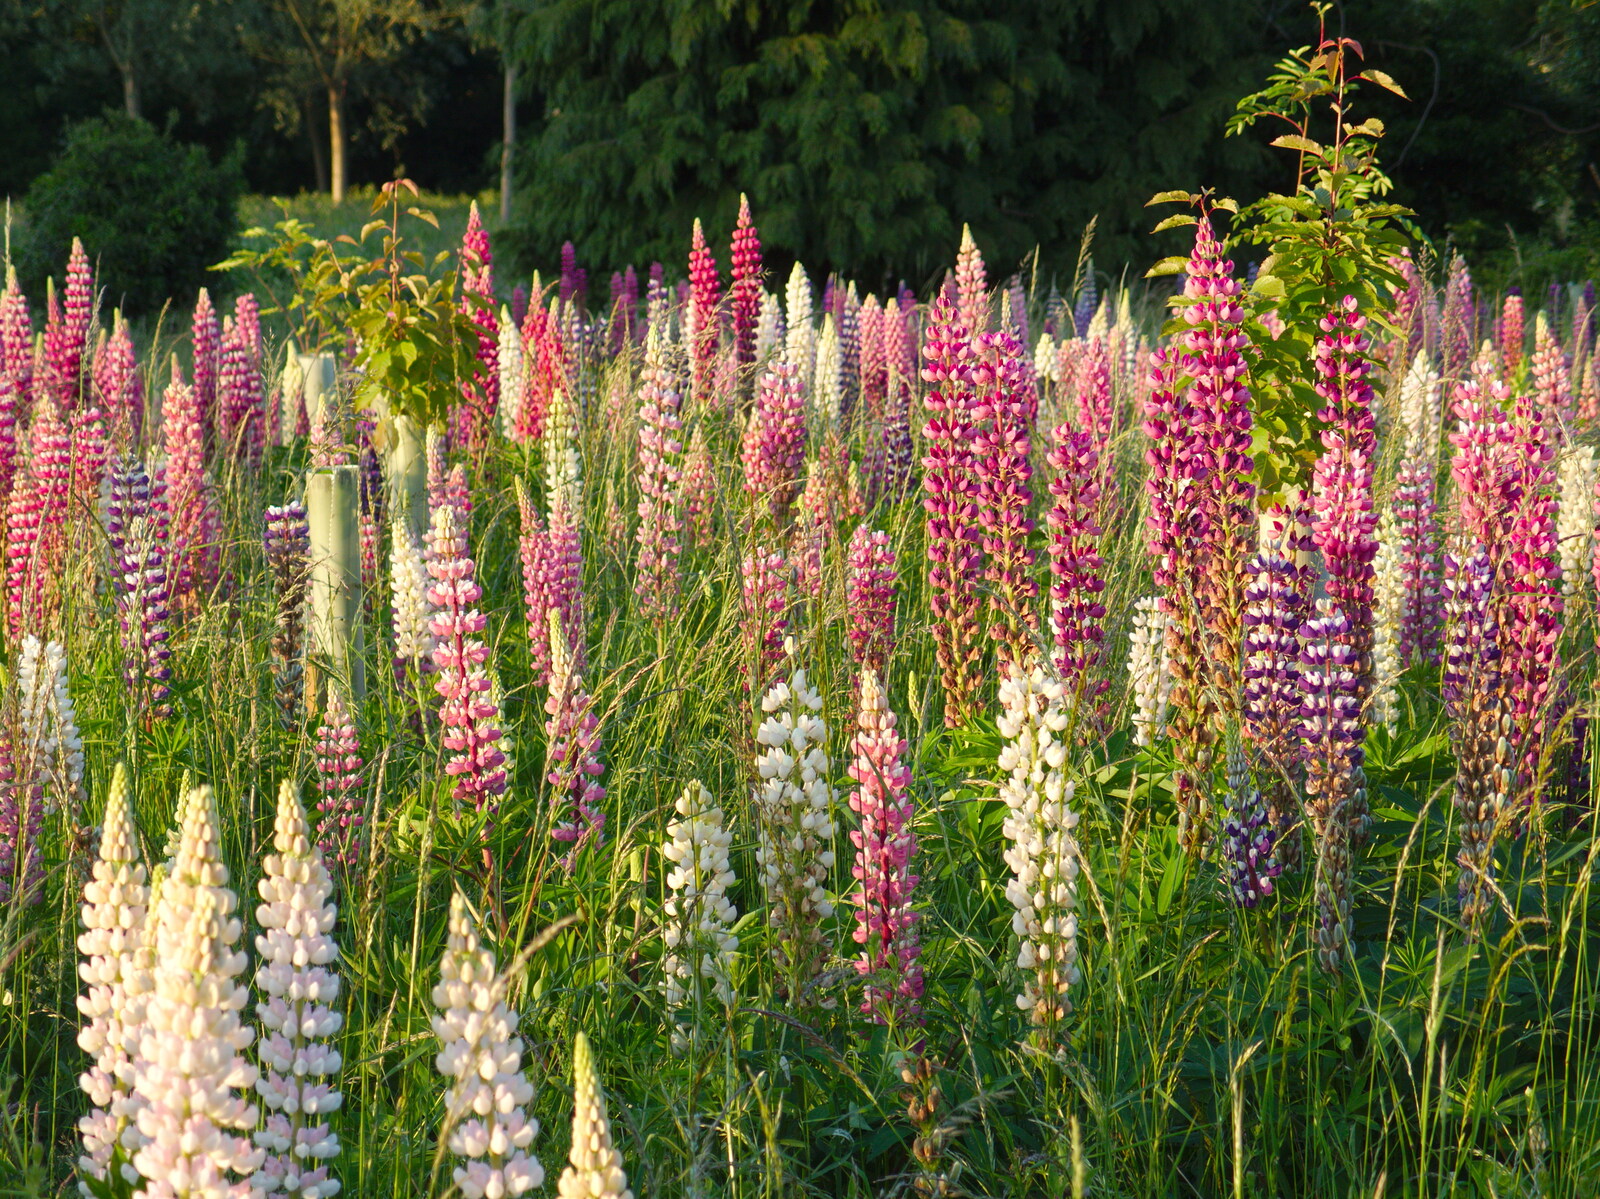 A field full of lupins from The BSCC at the Victoria, Earl Soham, Suffolk - 5th June 2014